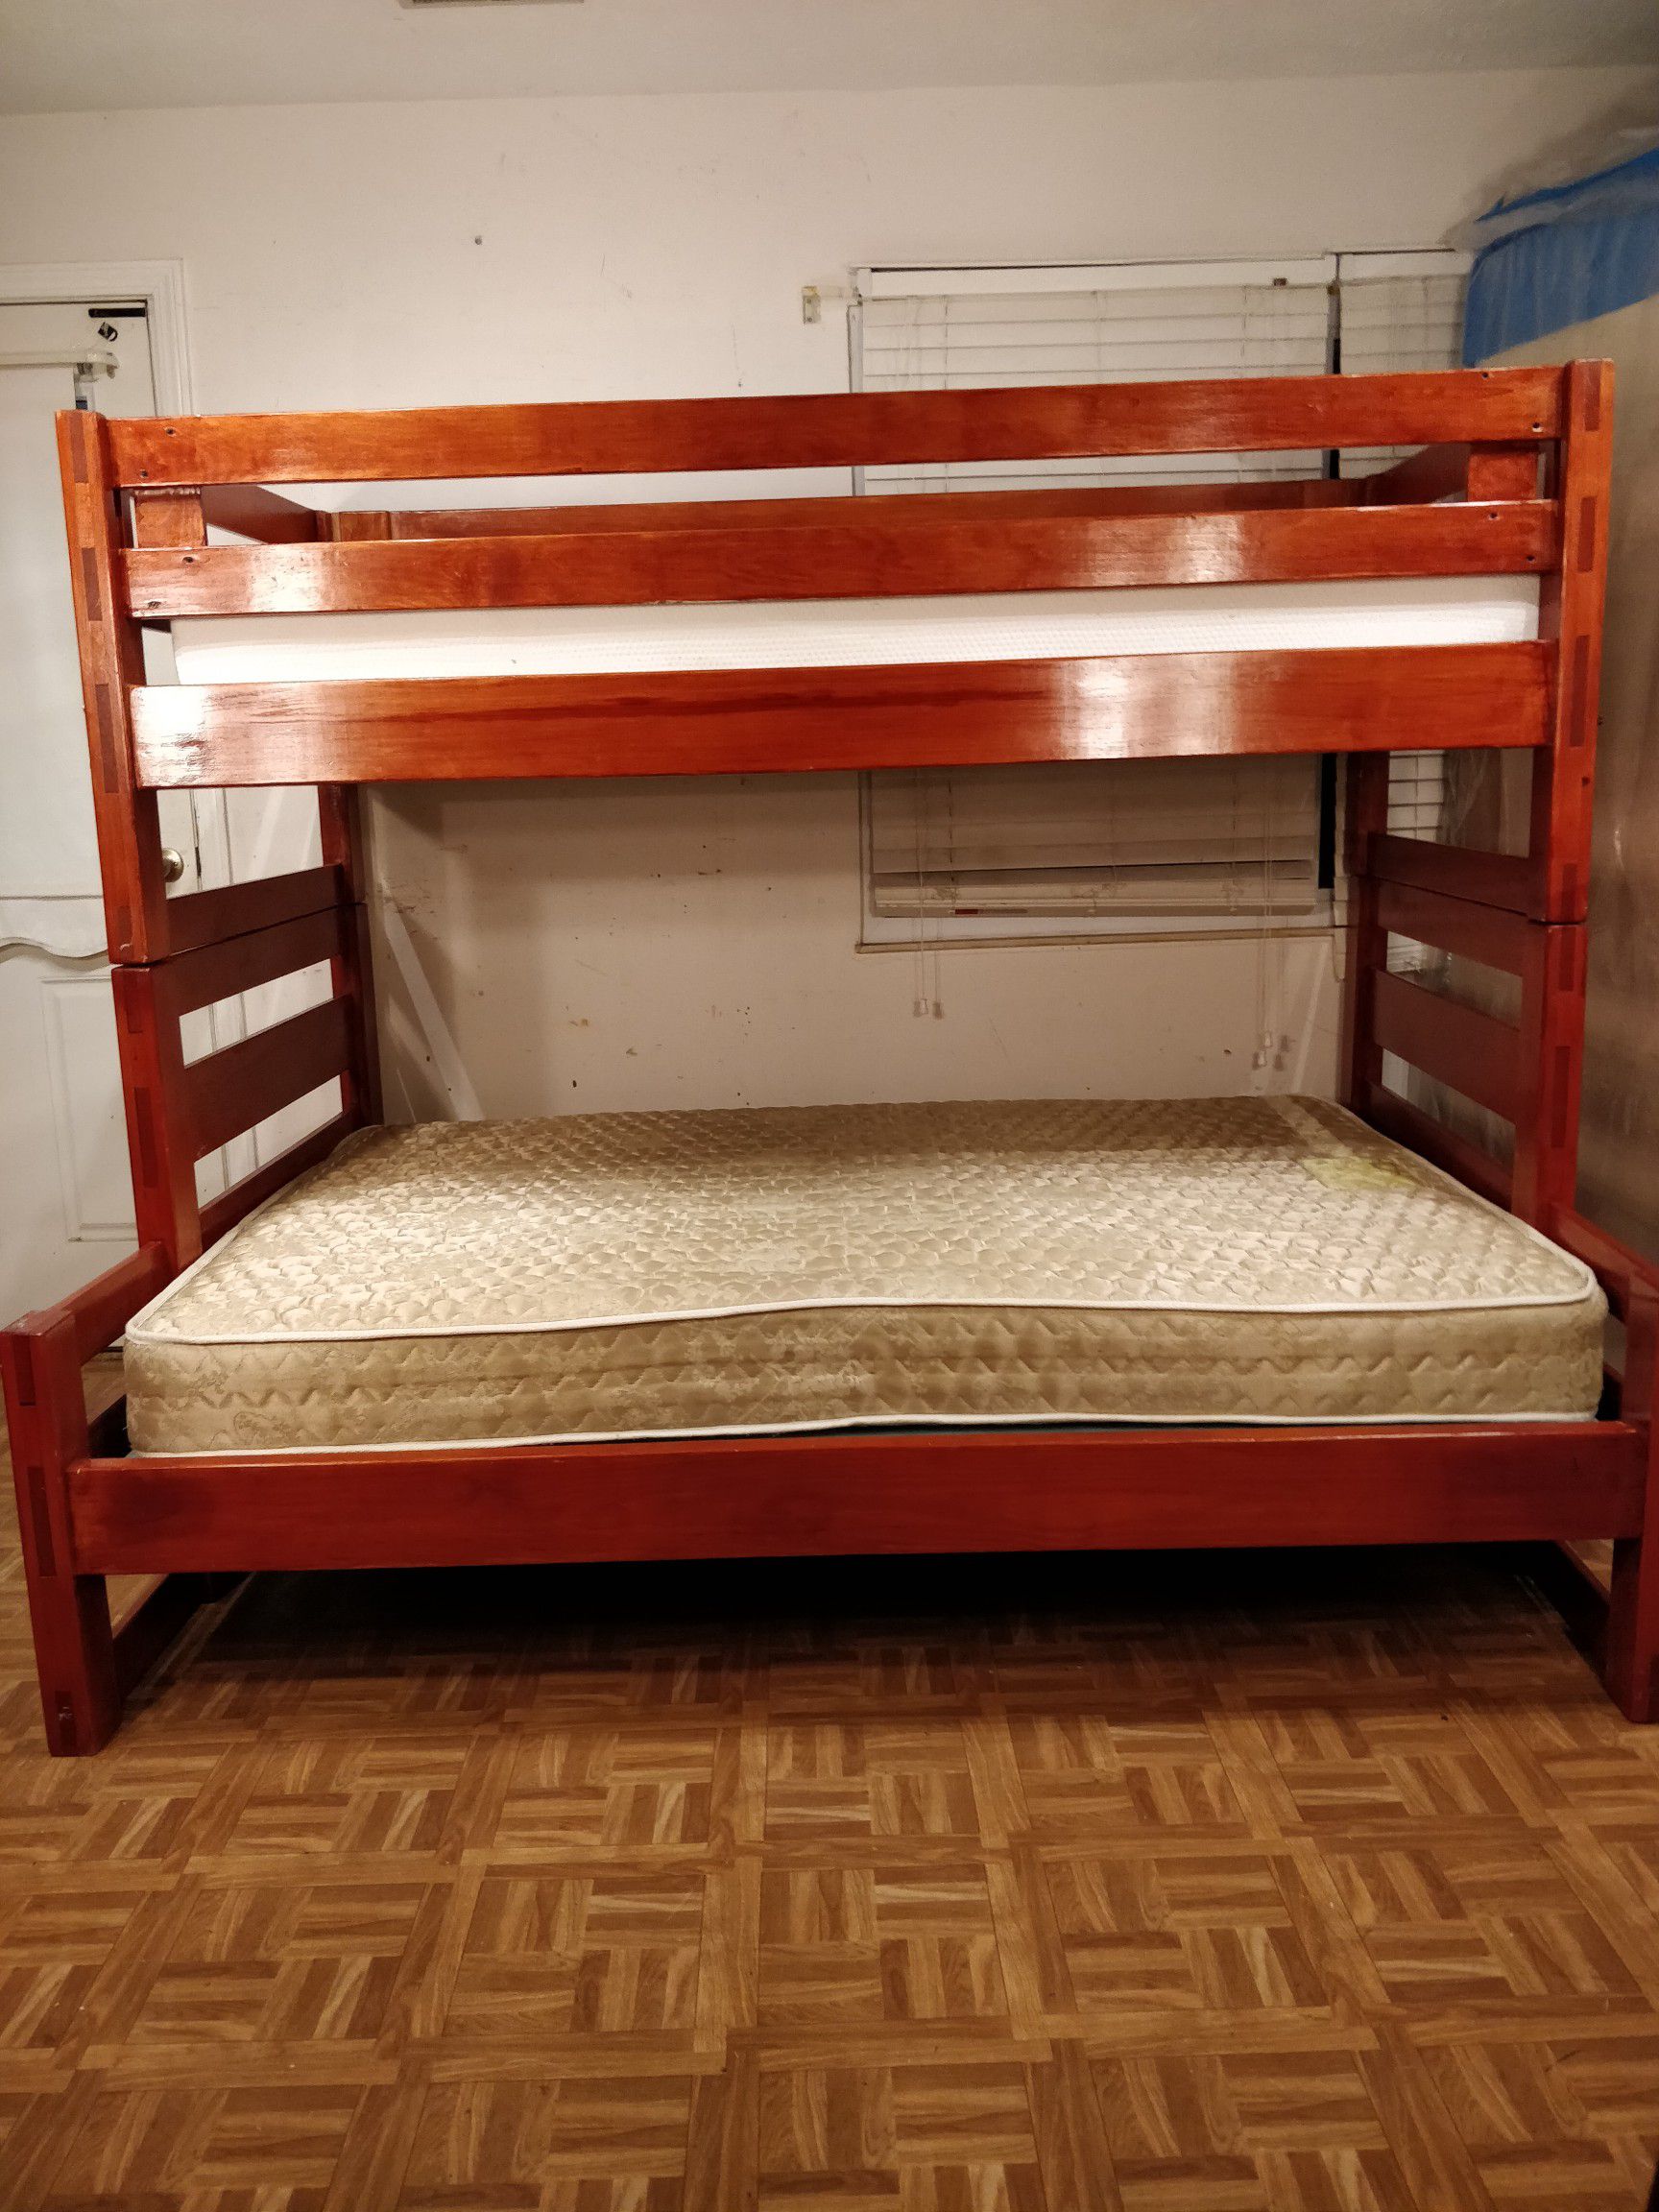 Solid wood Bunk bed with 2 mattresses in good condition, Driveway pickup.